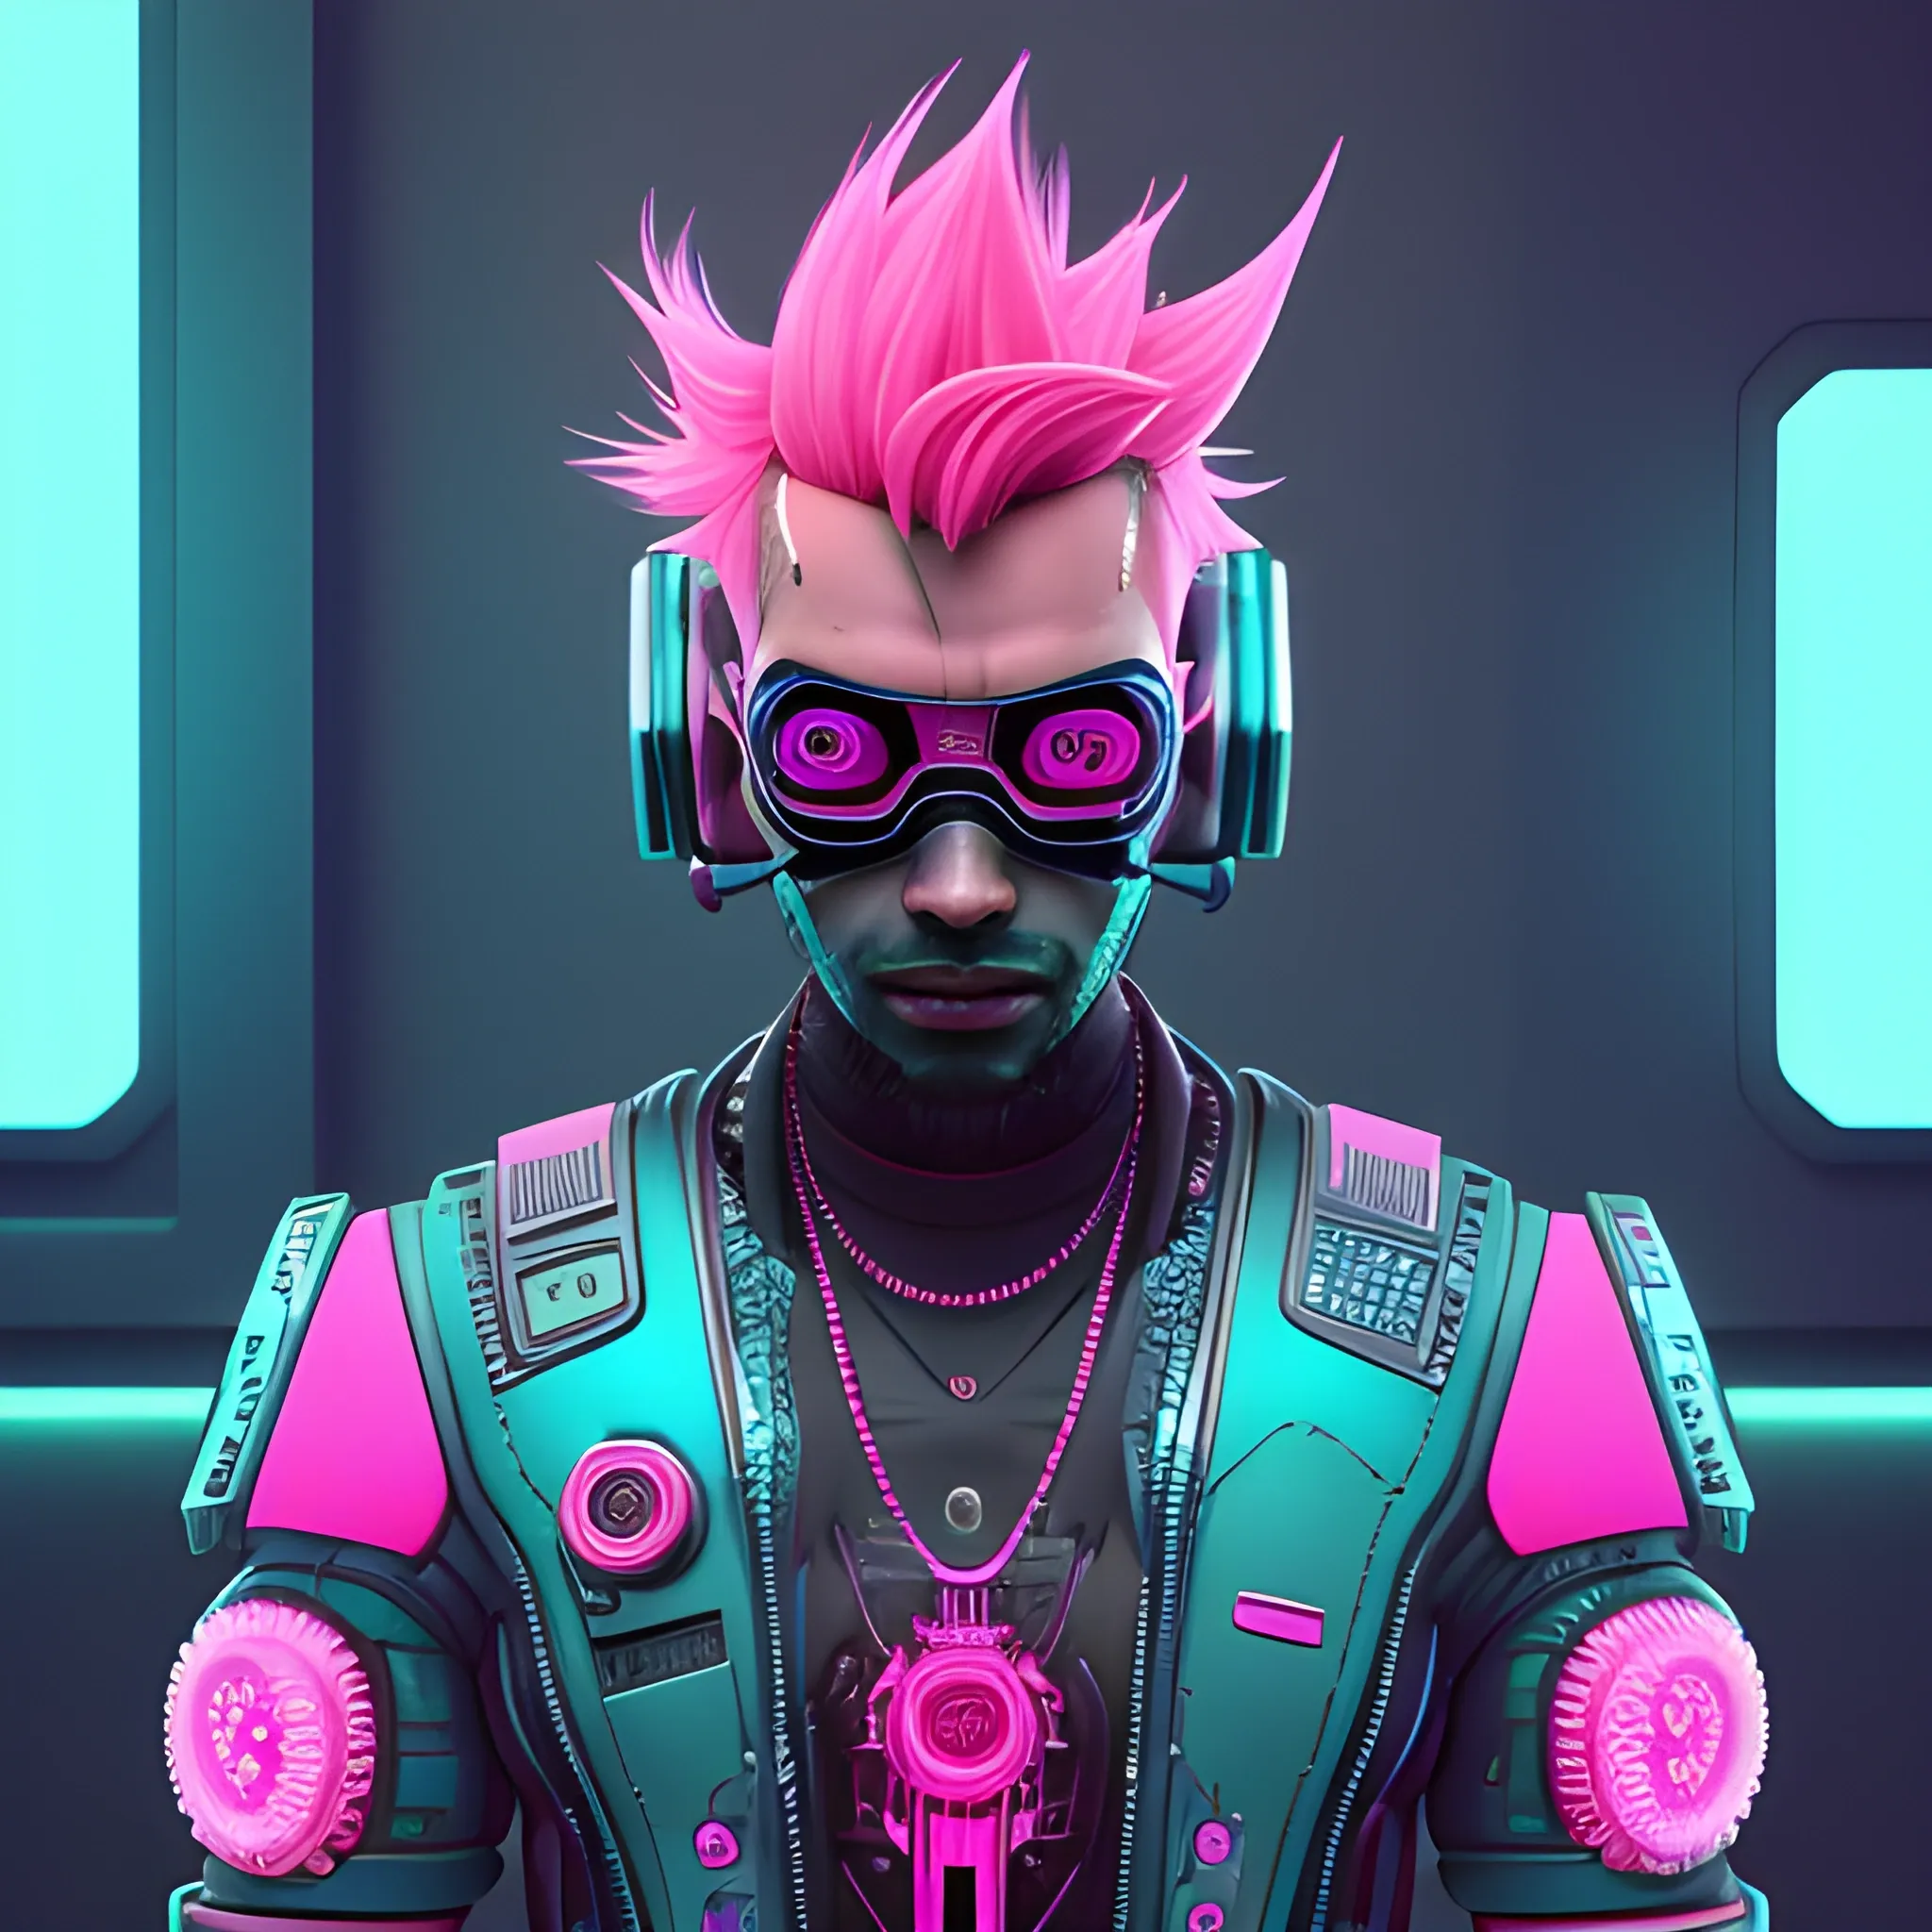 3D, Sci-Fi, Hip-hop, Urban, pink and cyan colored, circular male cyberpunk avatar, high-definition, realistic, intricate wavelength detailing, embossed circular frame, 